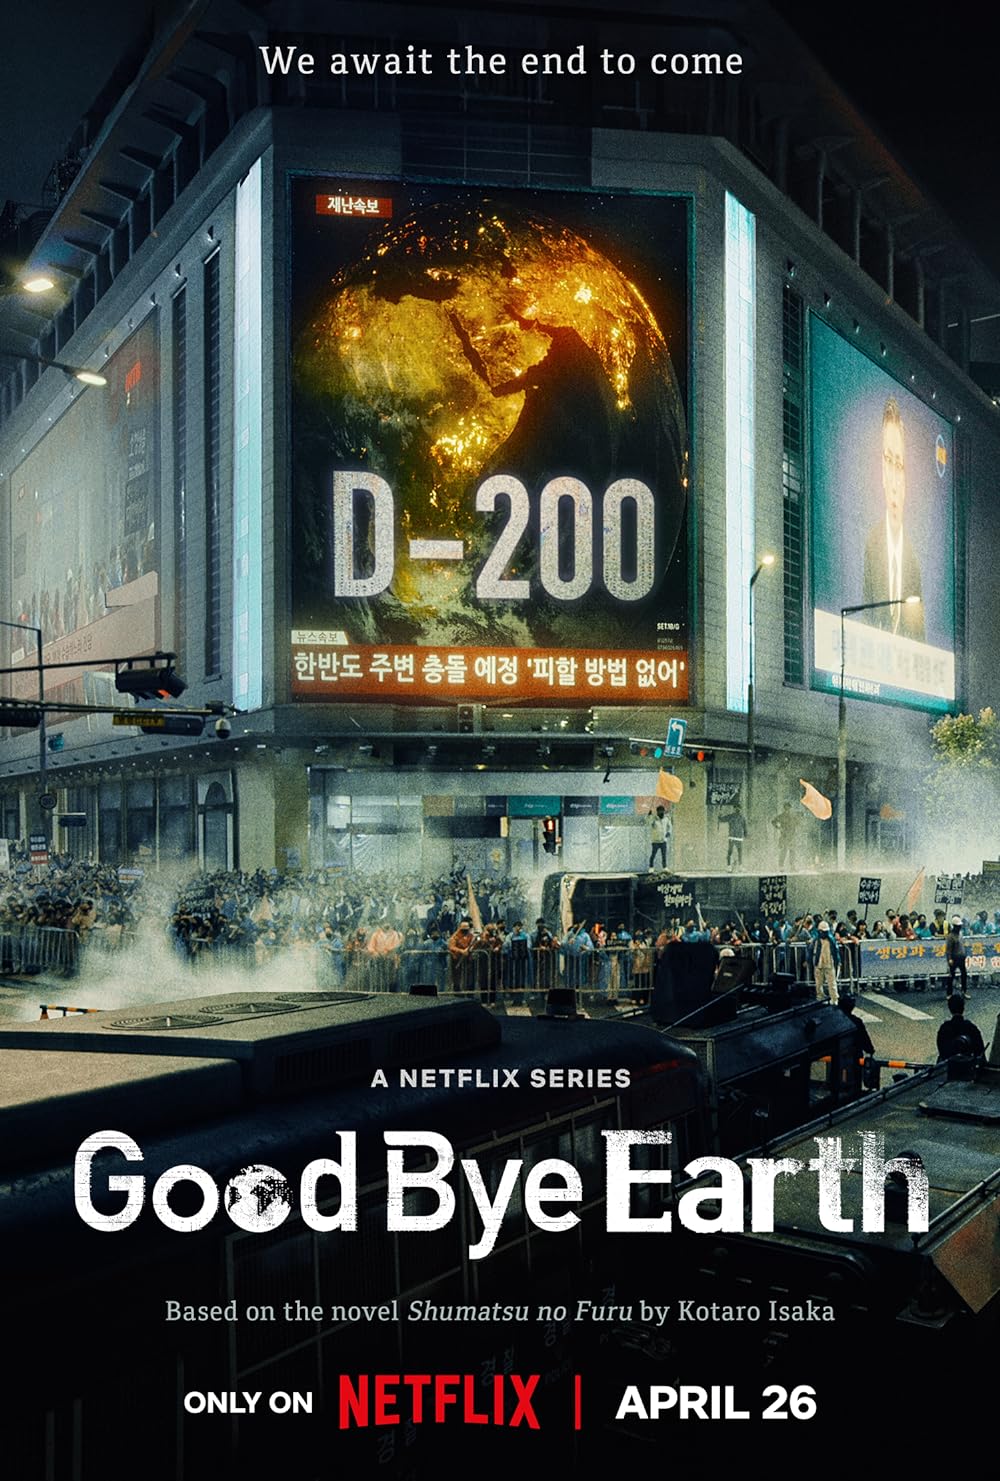 Goodbye Earth (April 26, Netflix)Witness the tumultuous lives of the inhabitants of Woongcheon City in 